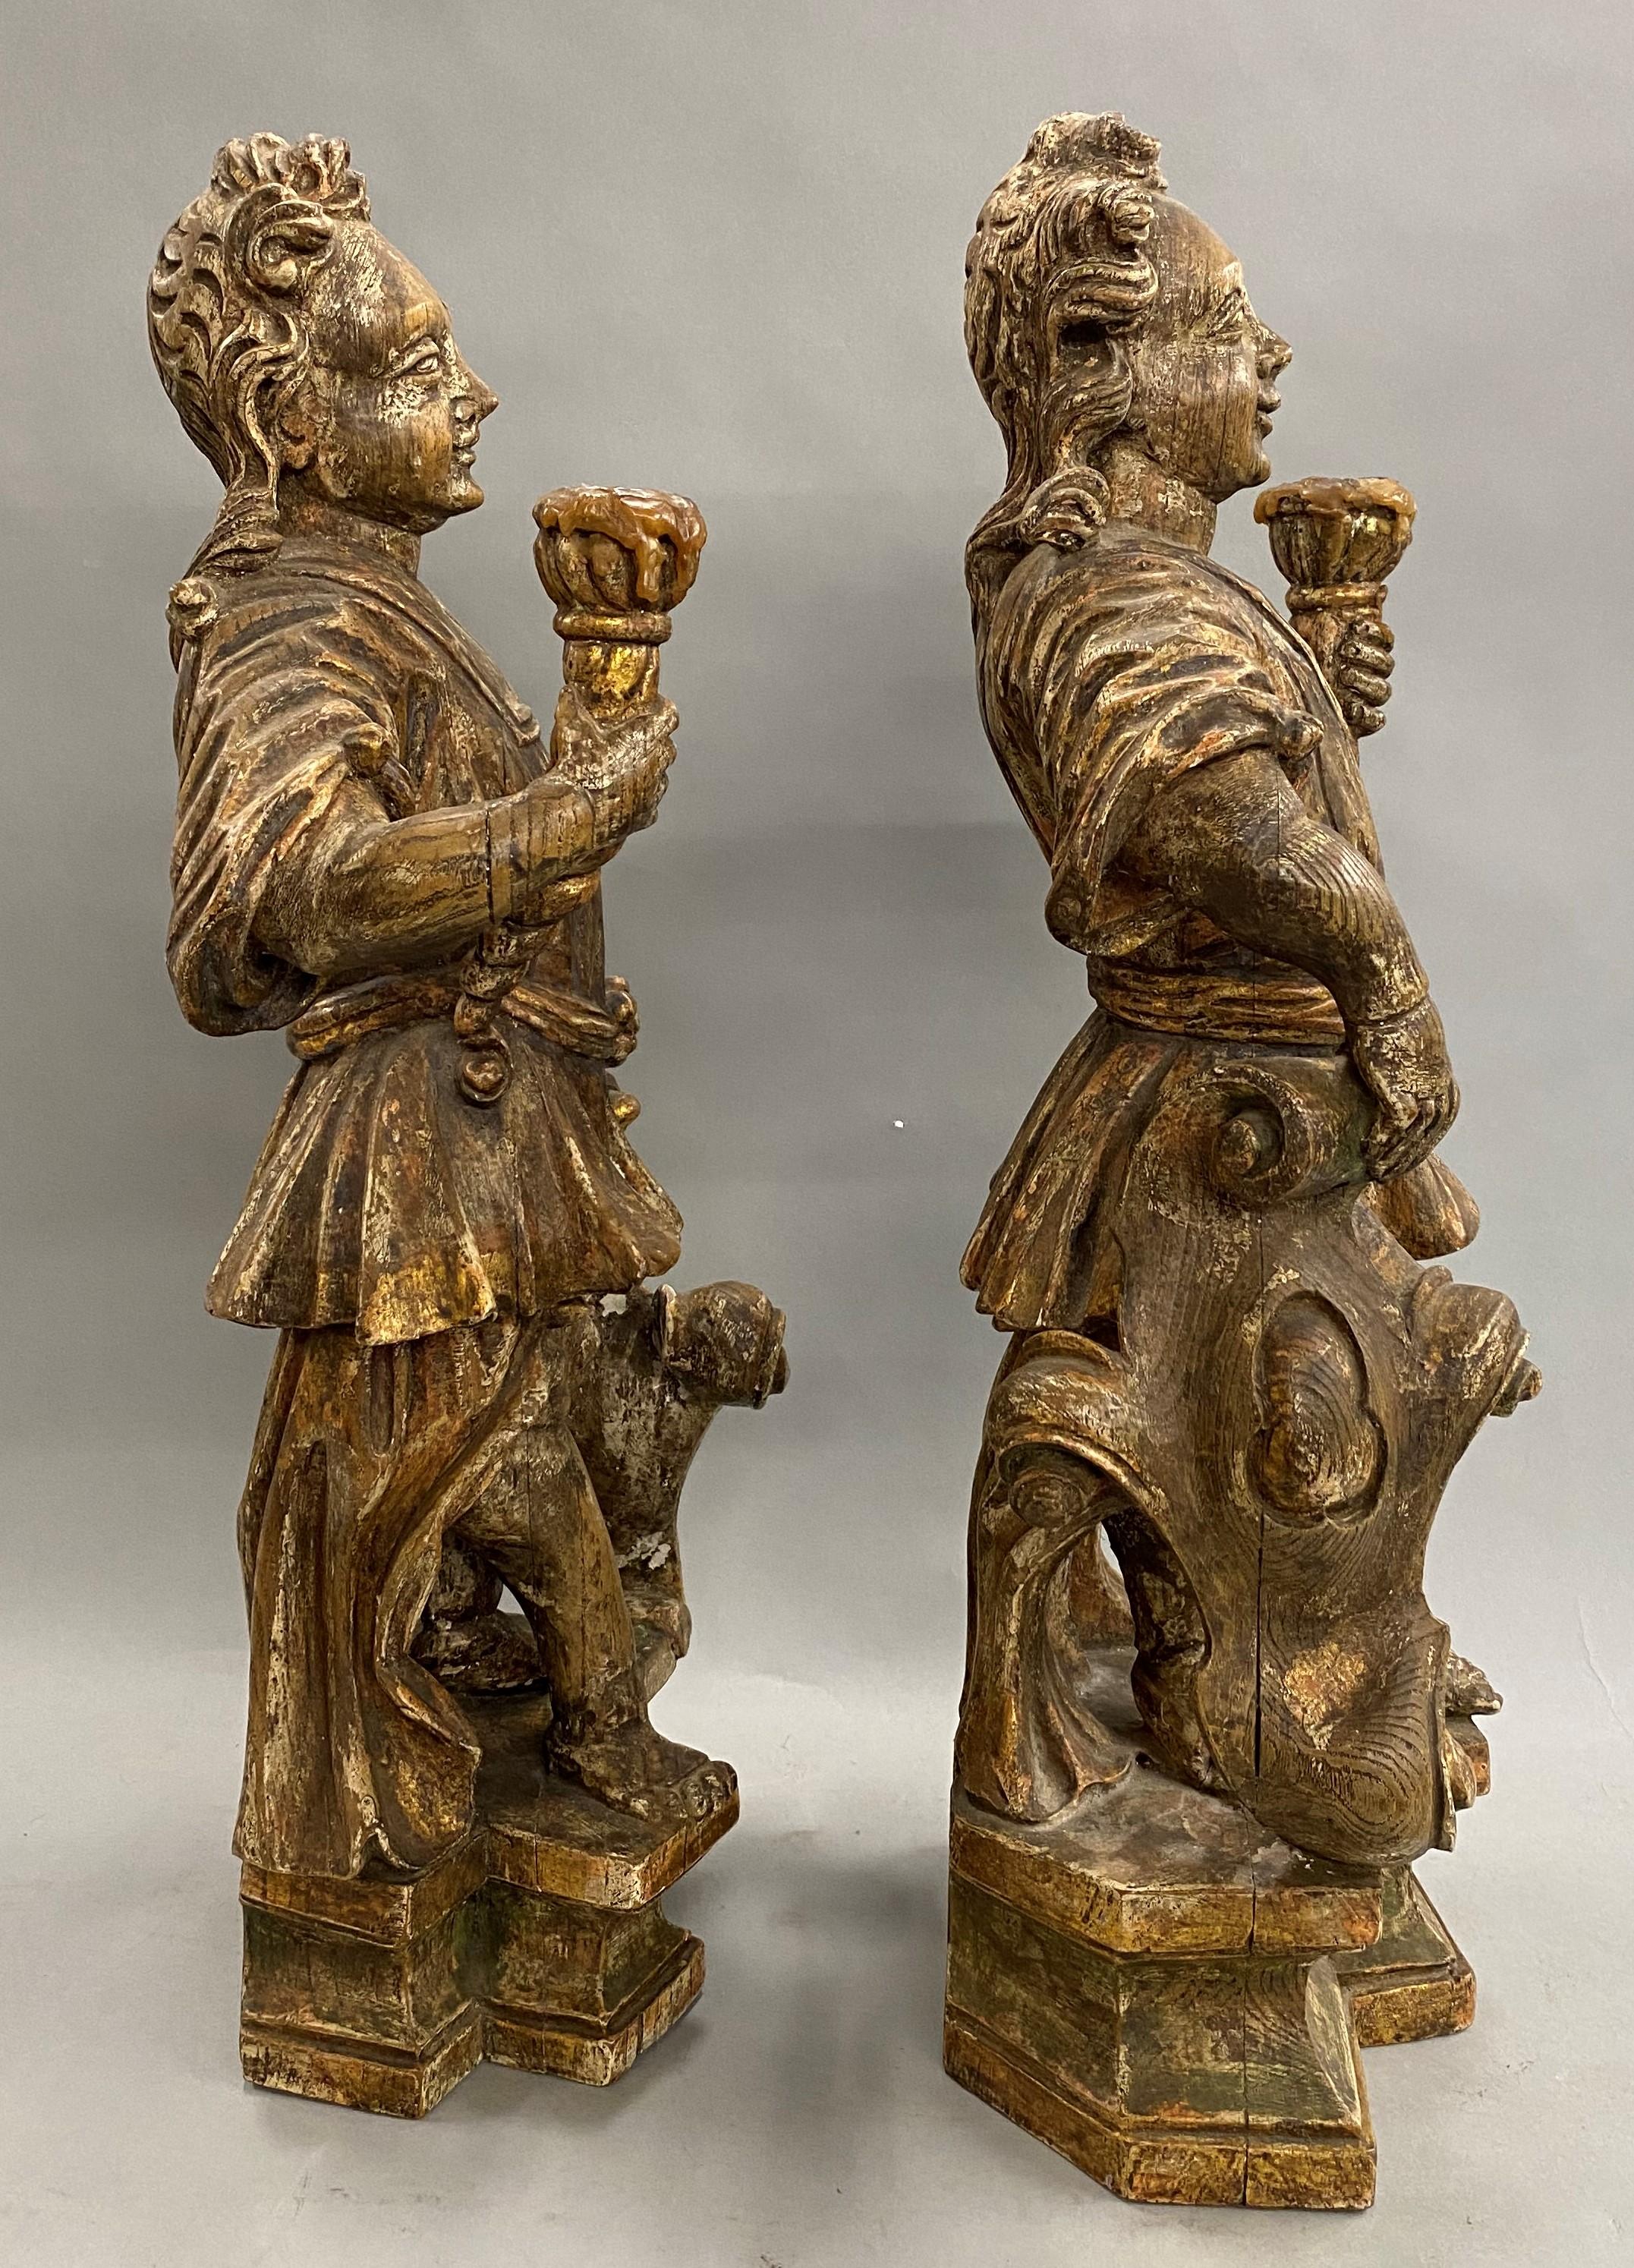 Pair of 18th Century Continental Figural Carved Polychrome & Gilt Candle Holders In Good Condition For Sale In Milford, NH